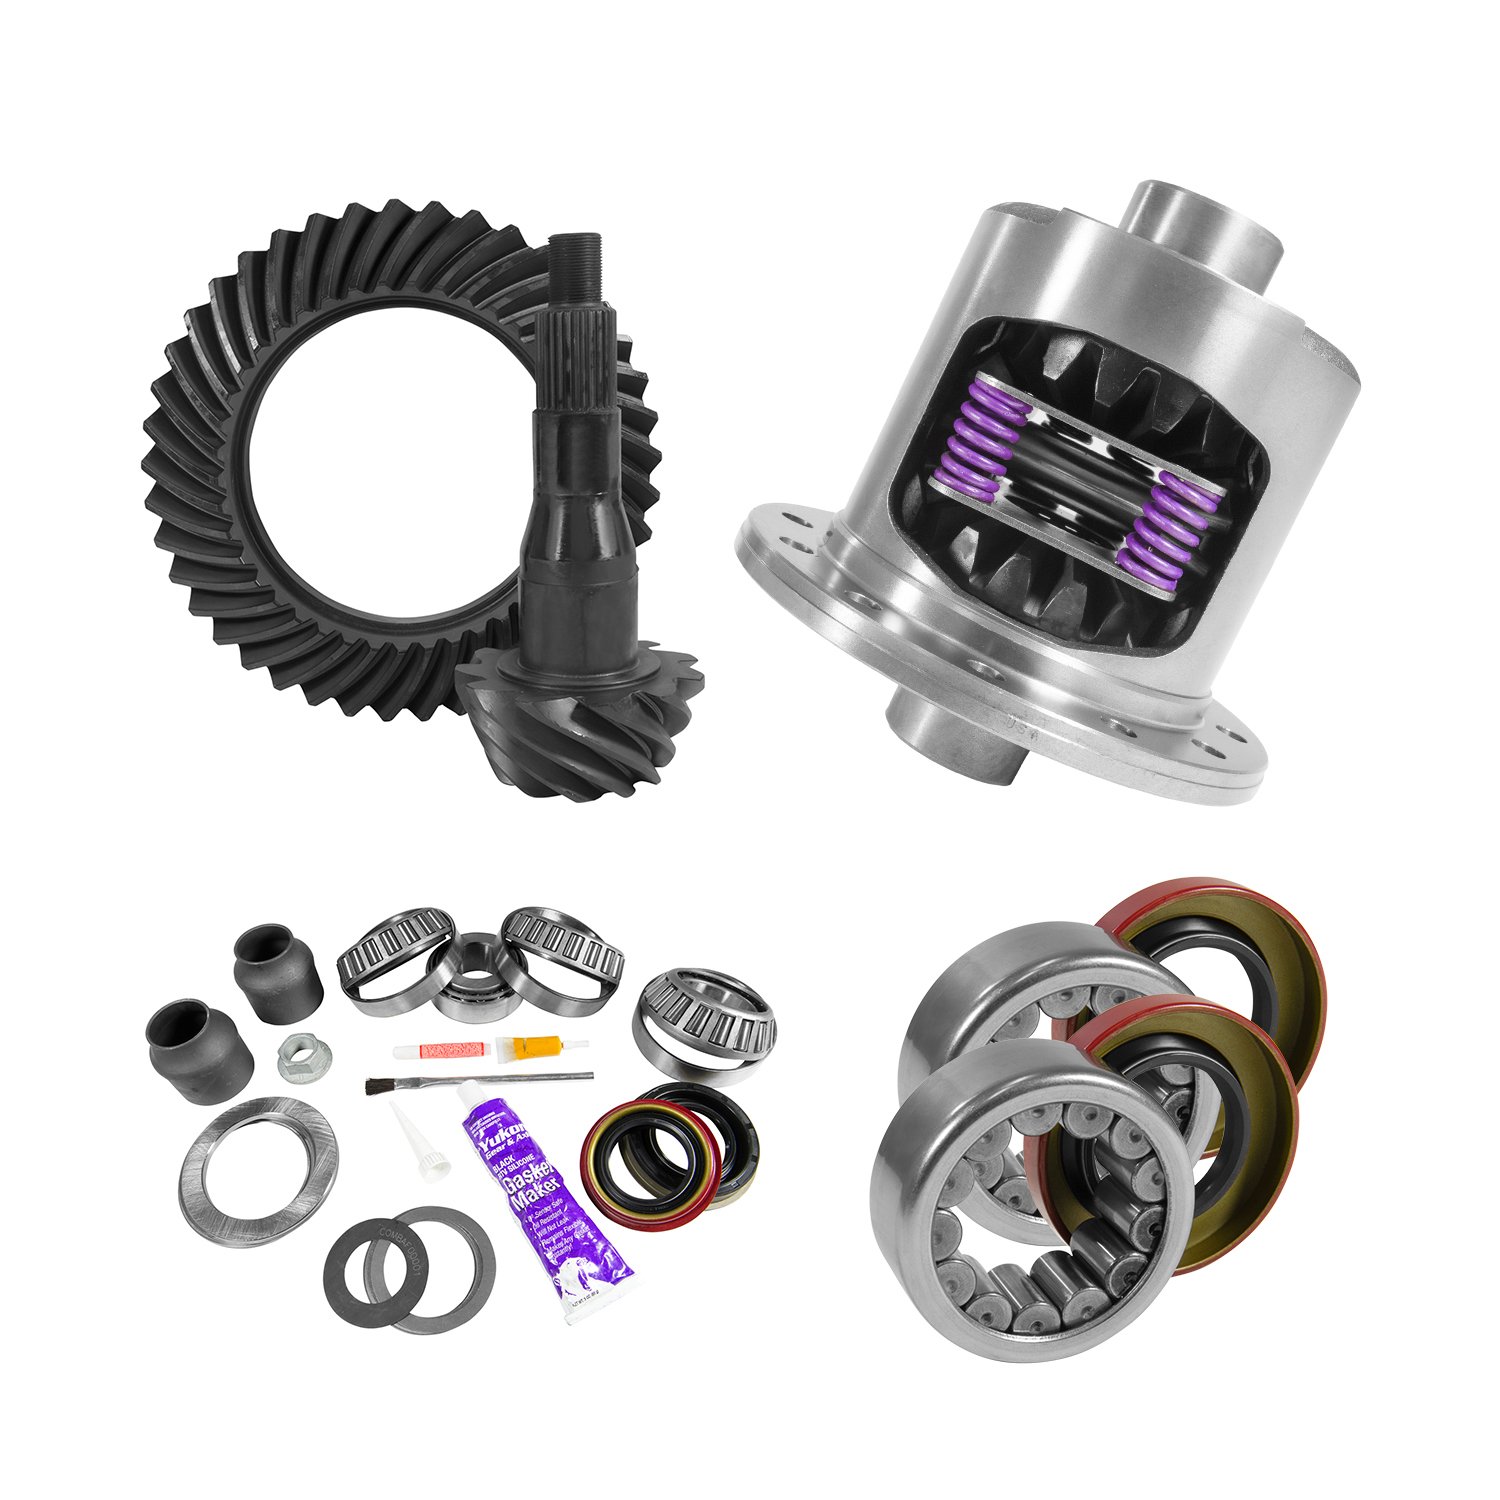 9.75 in. Ford 4.11 Rear Ring & Pinion, Install Kit, 34Spl Posi, 2.99 in. Axle Bearing